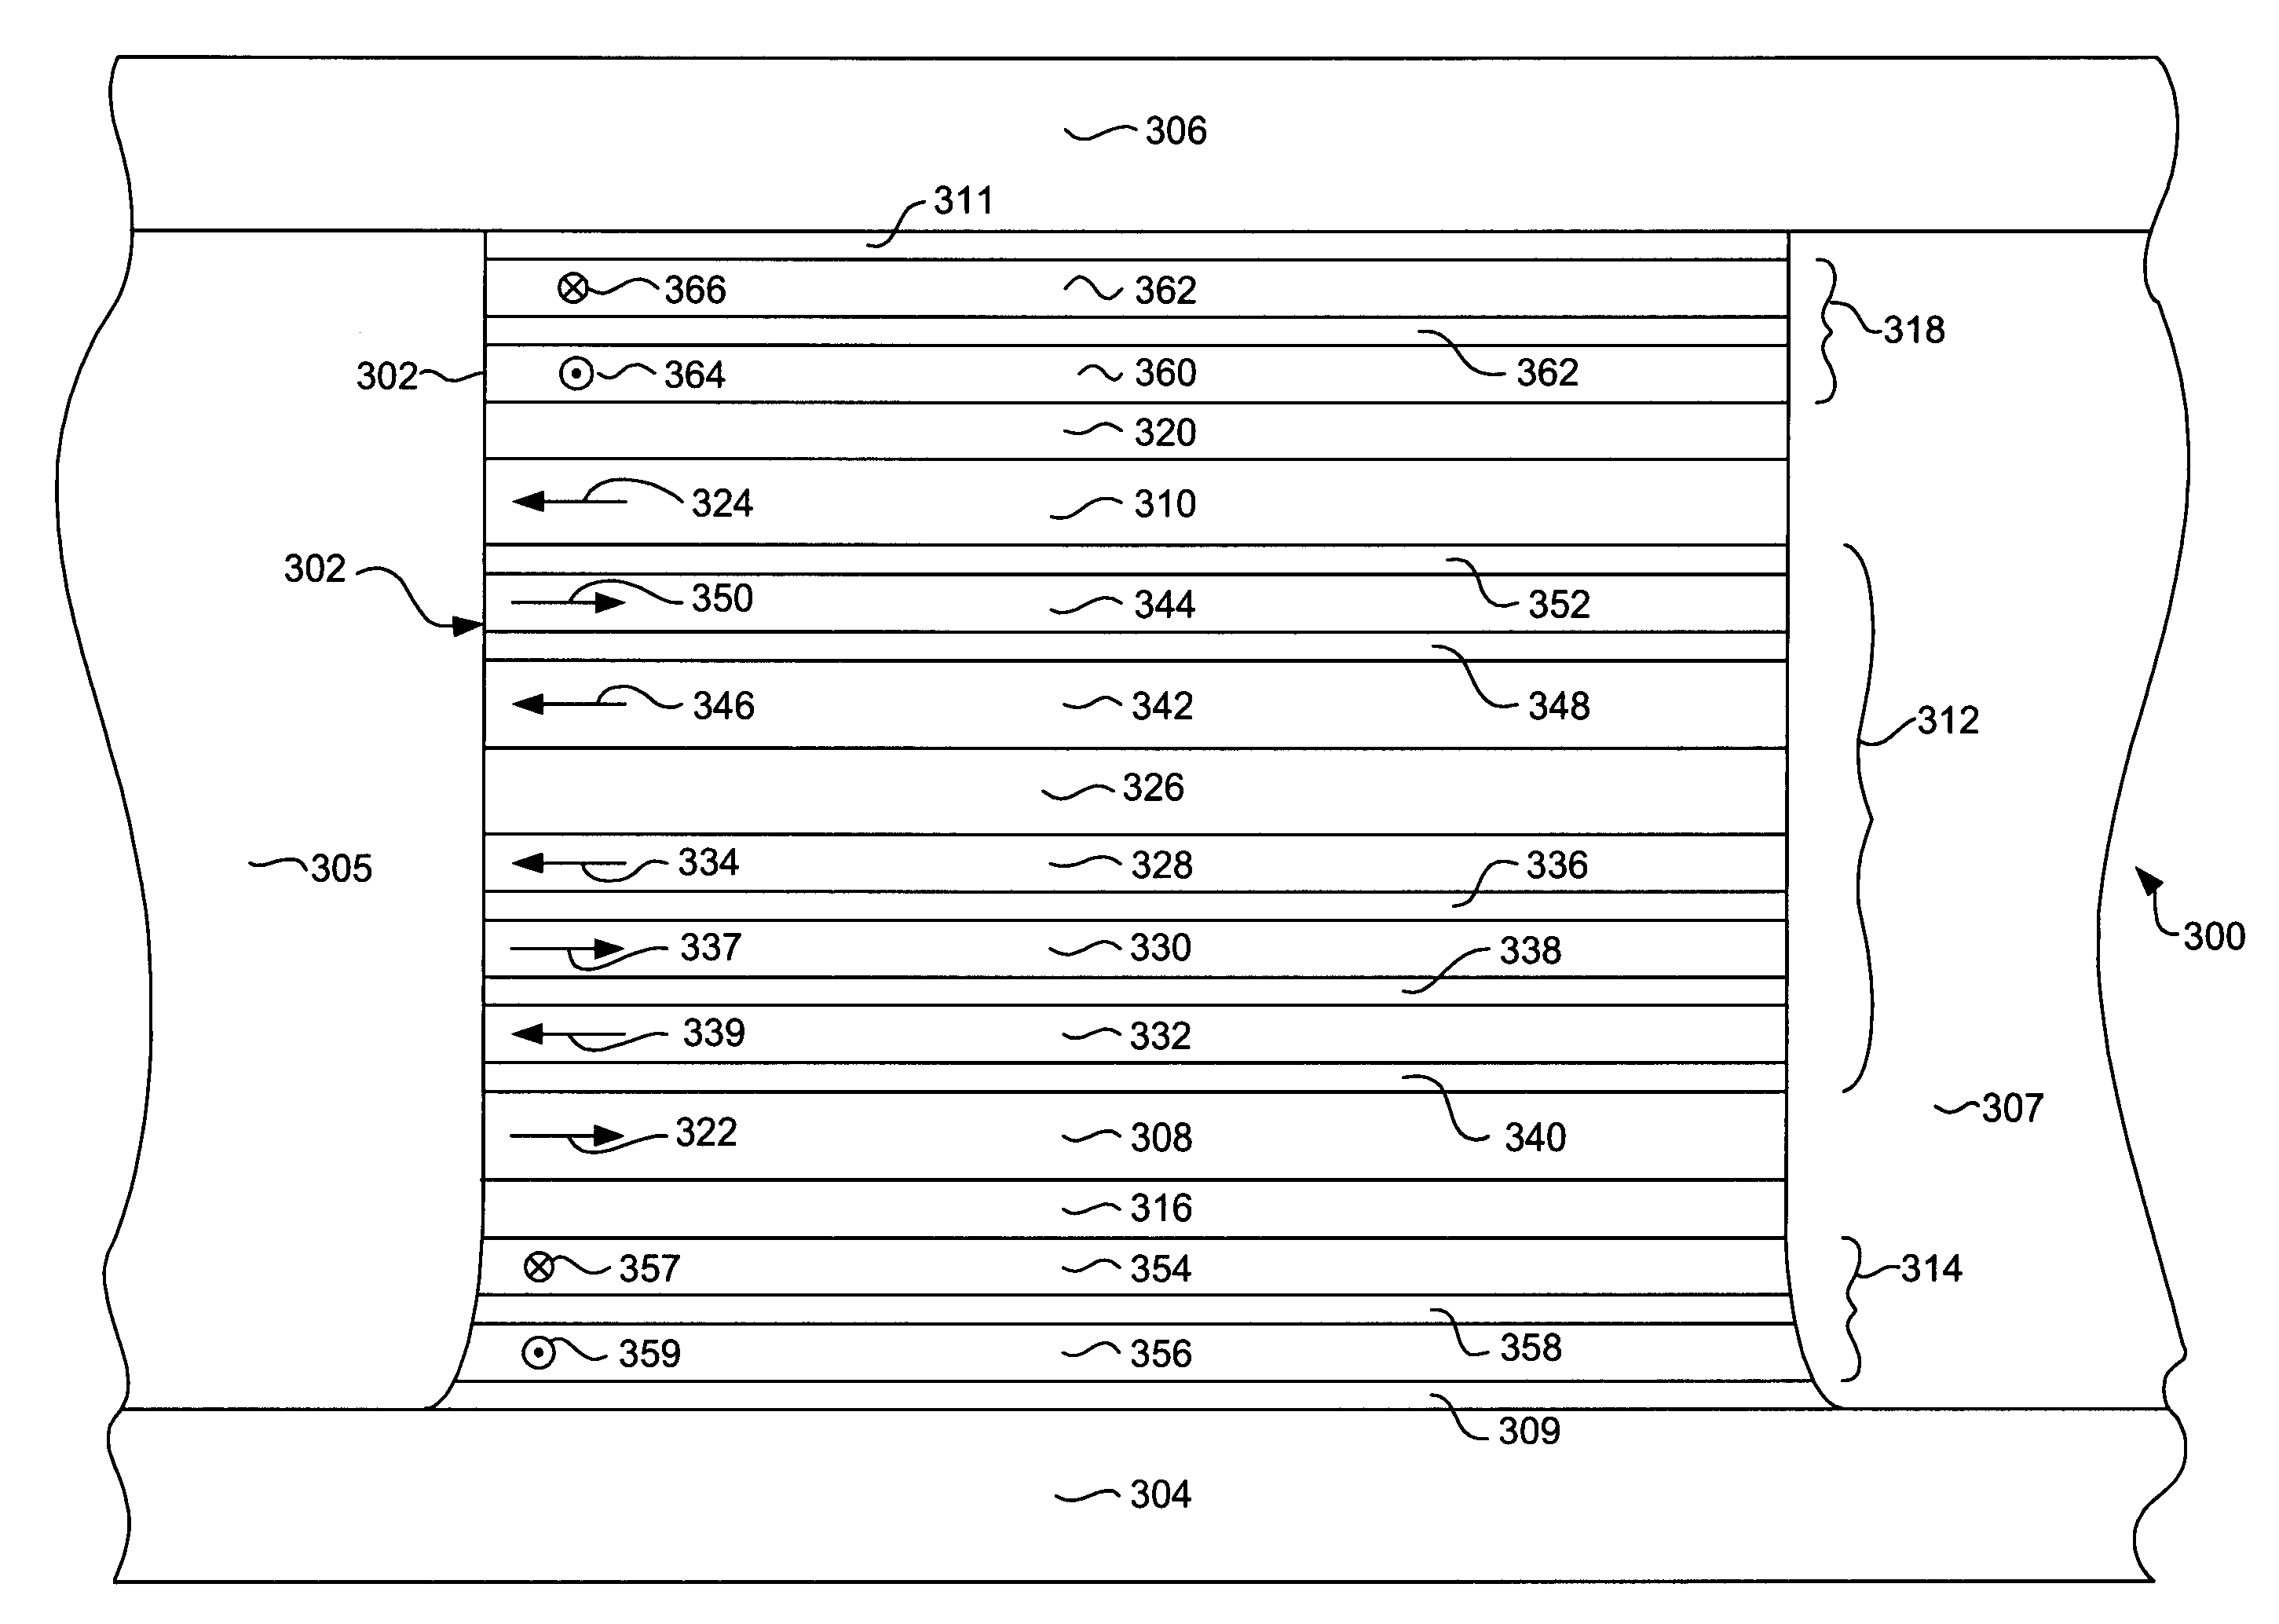 CPP differential GMR sensor having antiparallel stabilized free layers for perpendicular recording